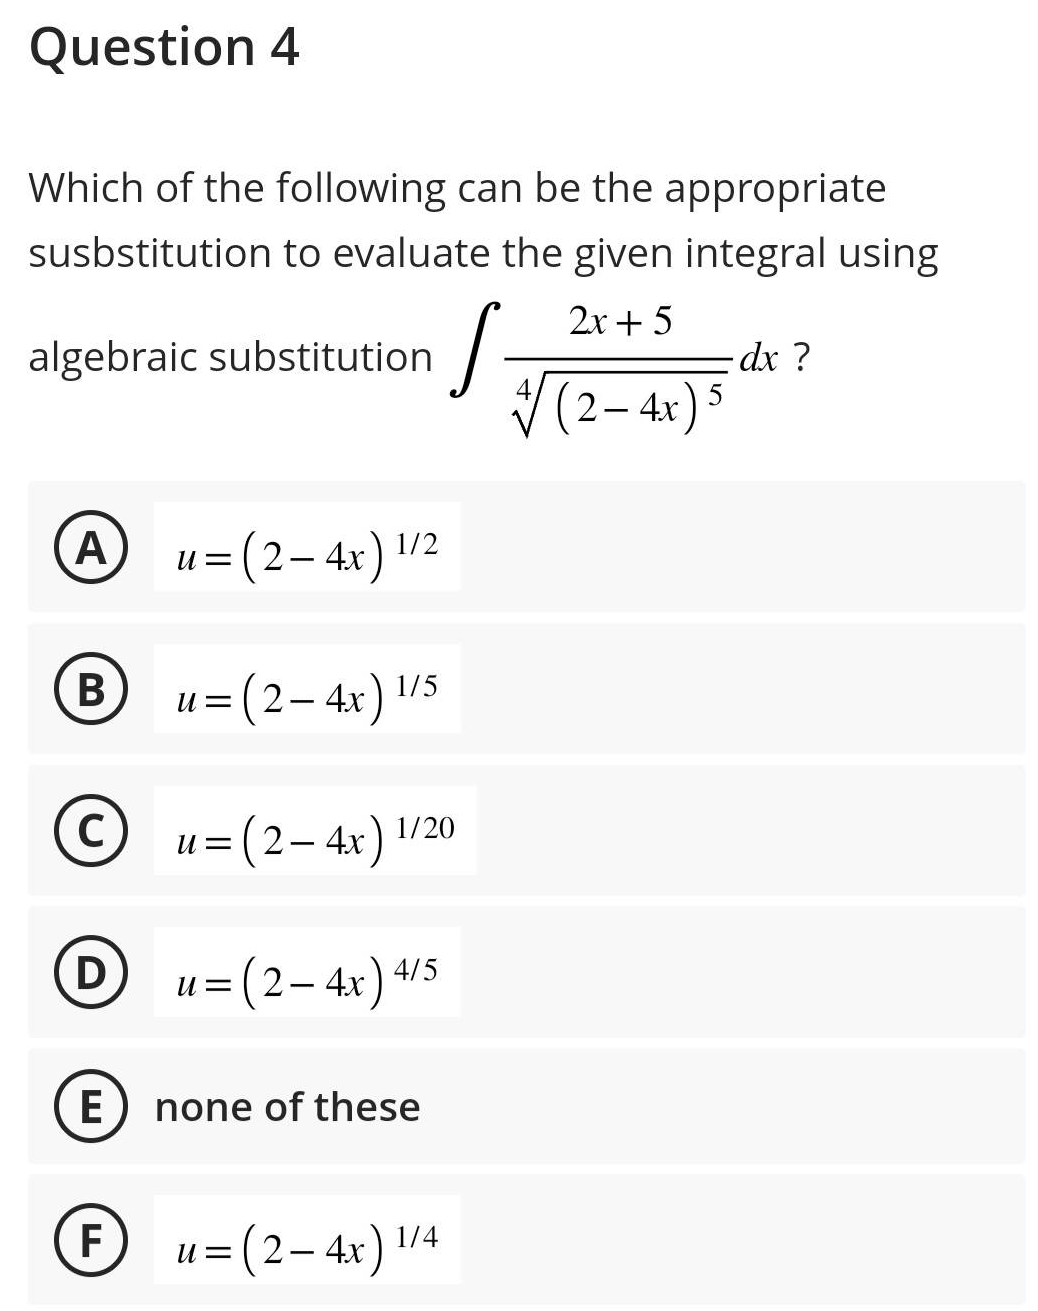 Question 4
Which of the following can be the appropriate
susbstitution to evaluate the given integral using
2x + 5
algebraic substitution
A
B
C
D
E
F
U= = (2-4x) 1/2
U
= (2-4x) 1/5
U= =
U =
= (2-4x) 4/5
(2-4x) 1/20
none of these
U=
S
(2-4x) 1/4
- dx ?
* (2-4x) 5